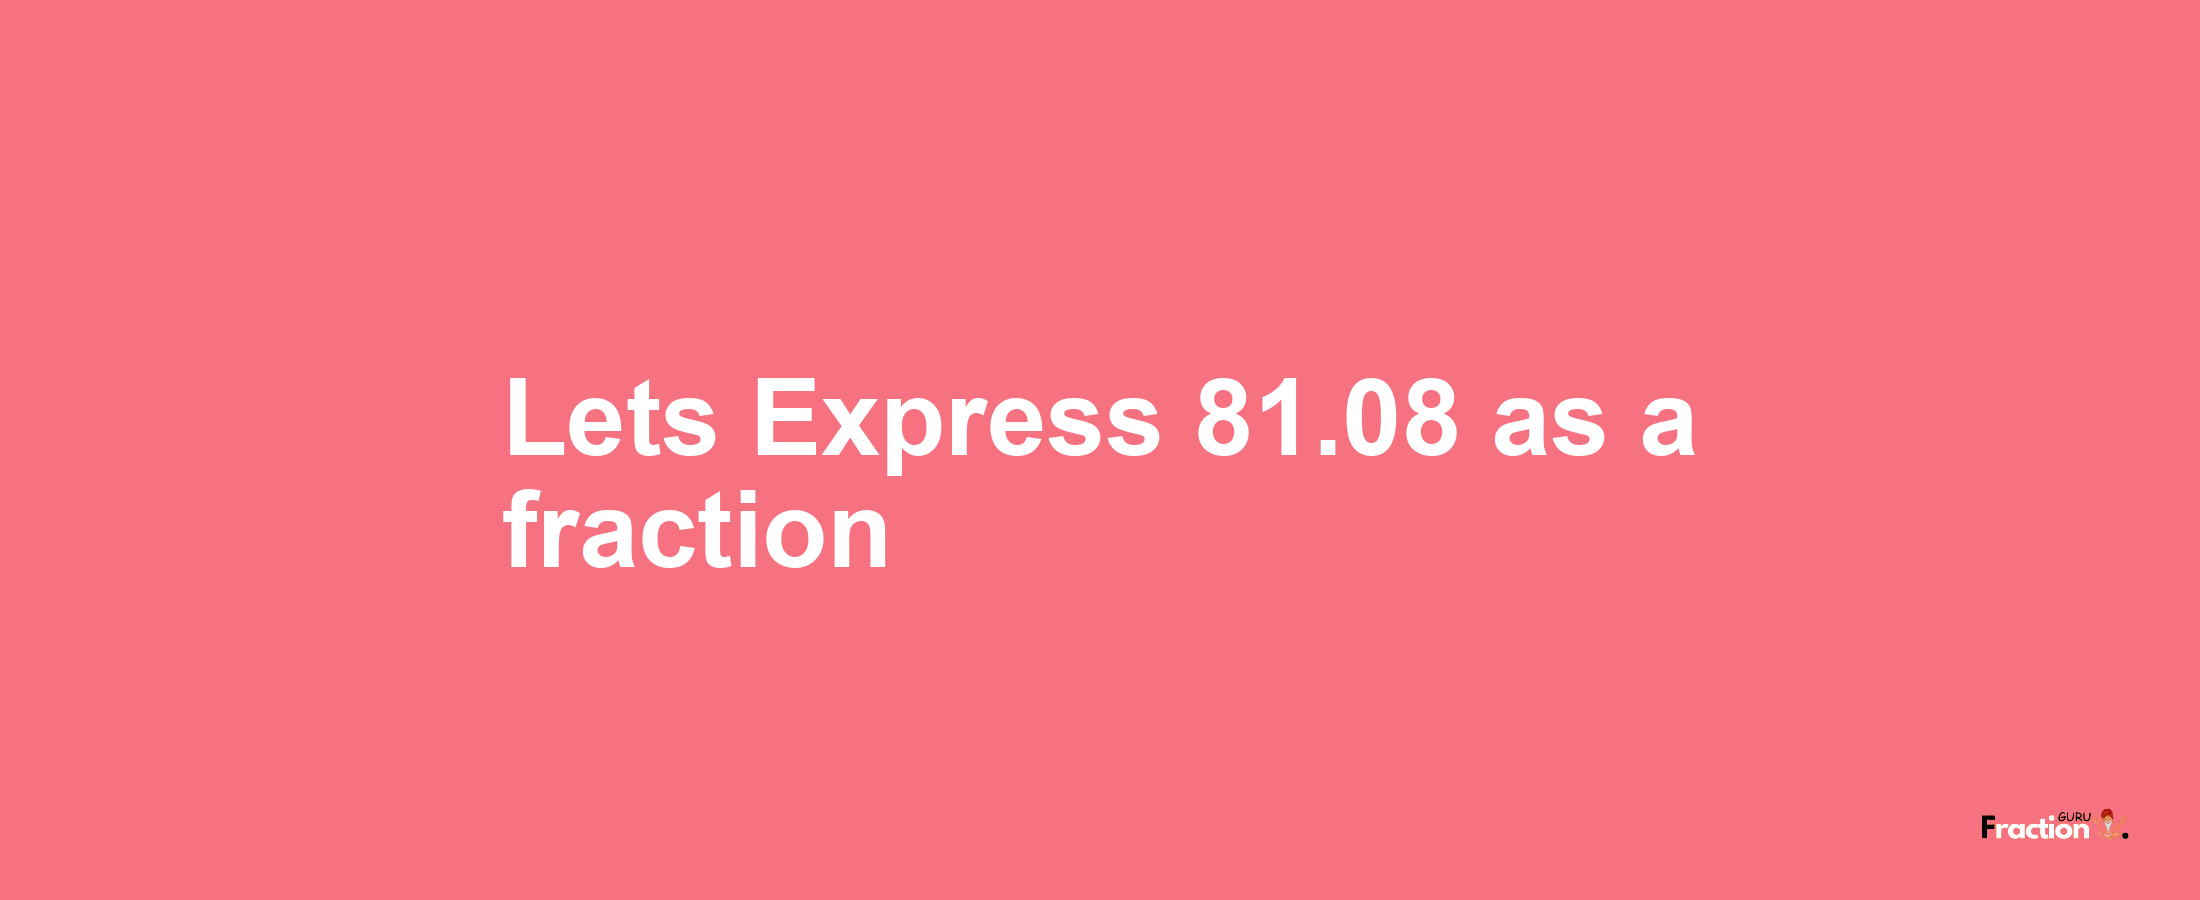 Lets Express 81.08 as afraction